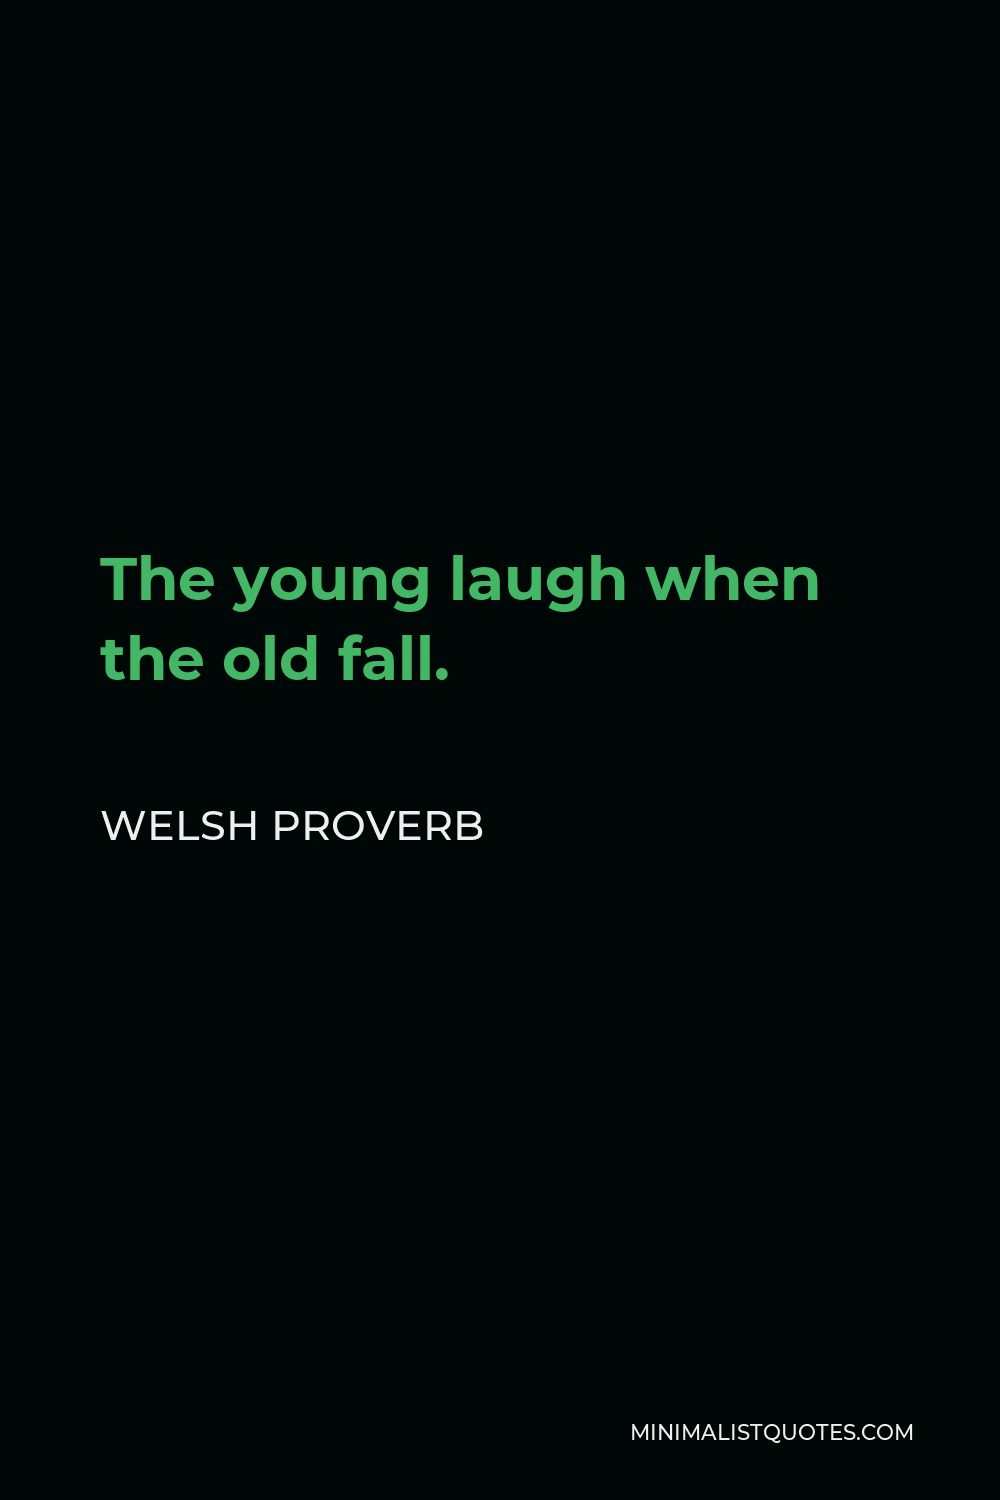 Welsh Proverb Quote - The young laugh when the old fall.